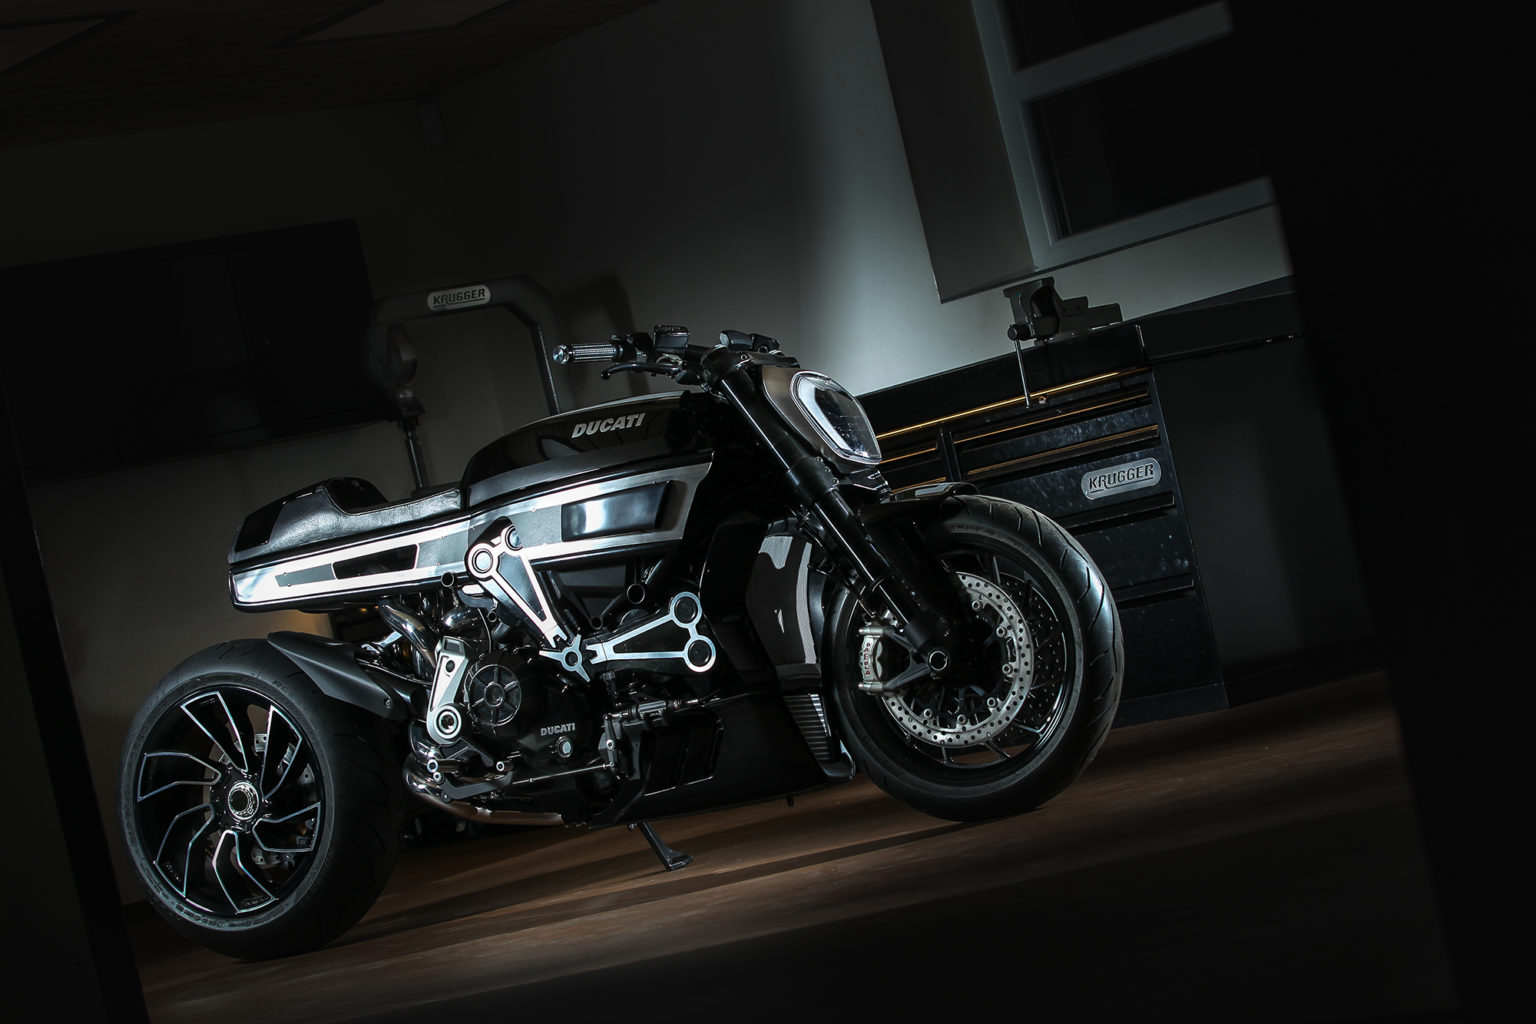 Ducati XDiavel by Fred Krugger